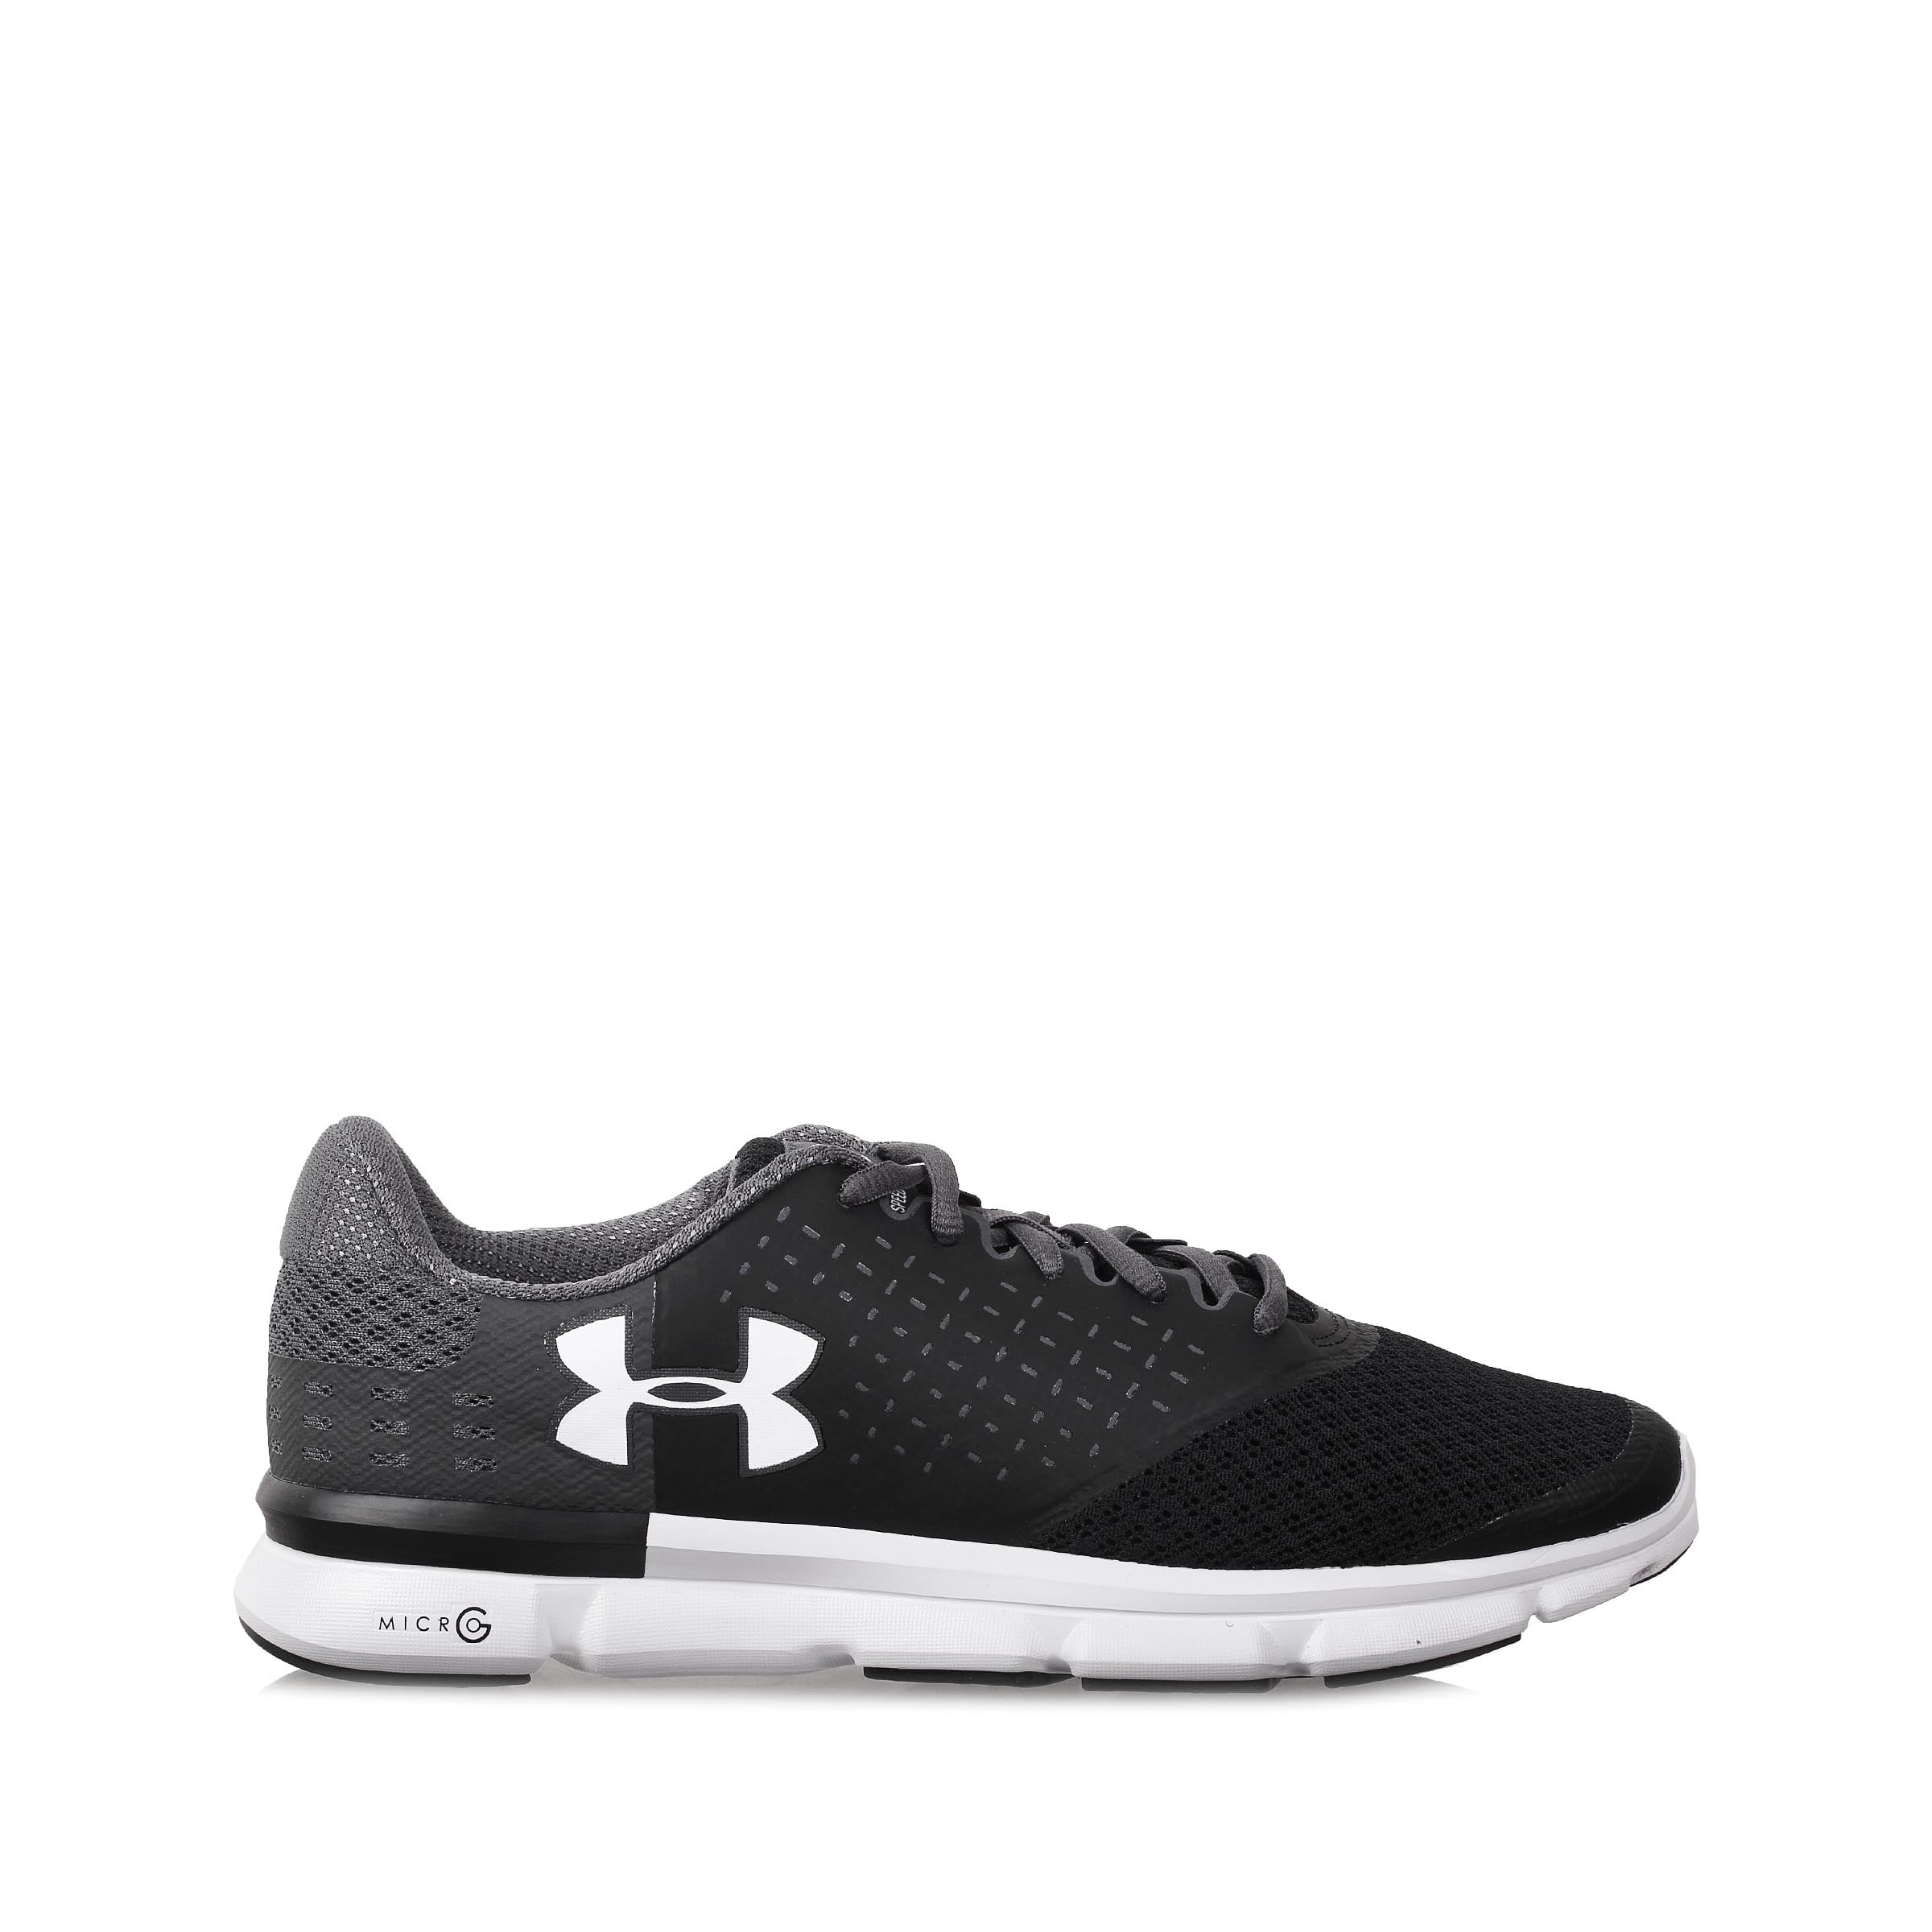 Black Under Armour UA Micro G Speed Swift 2 Mens Running Shoes Sports Trainers 